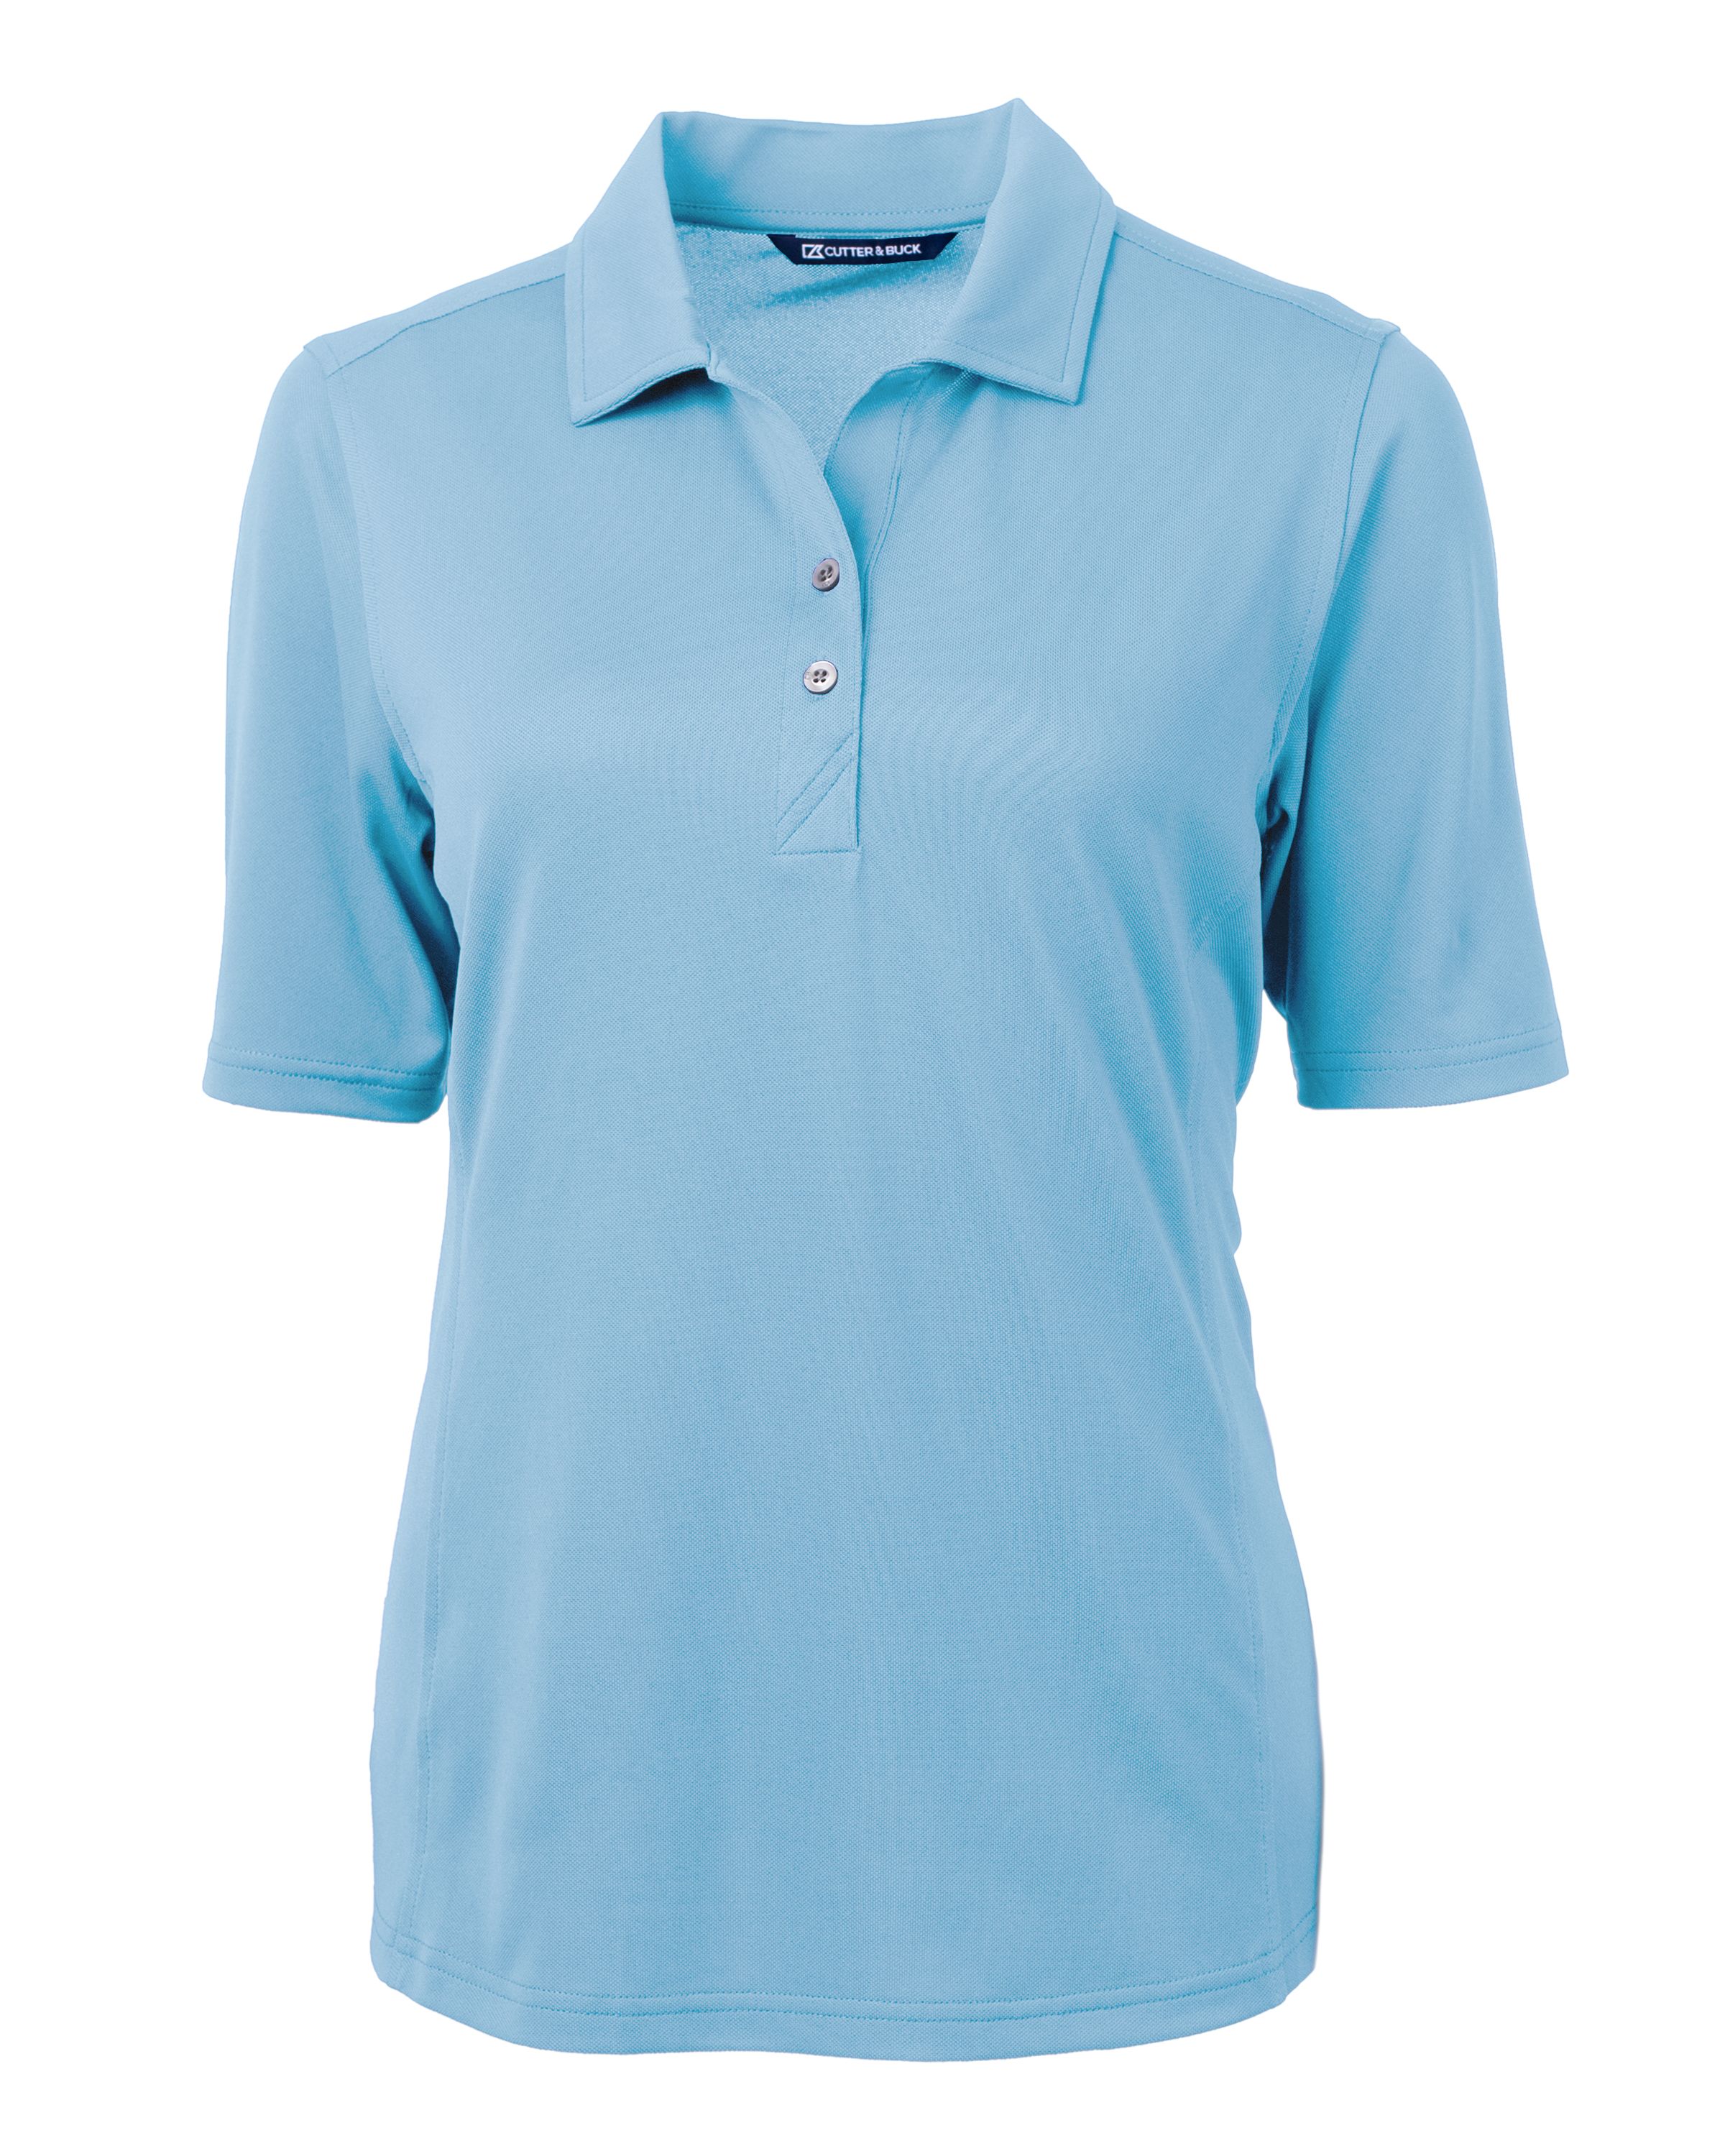 Buy CB Virtue Eco Pique Recycled Womens Polo - Cutter & Buck Online at ...